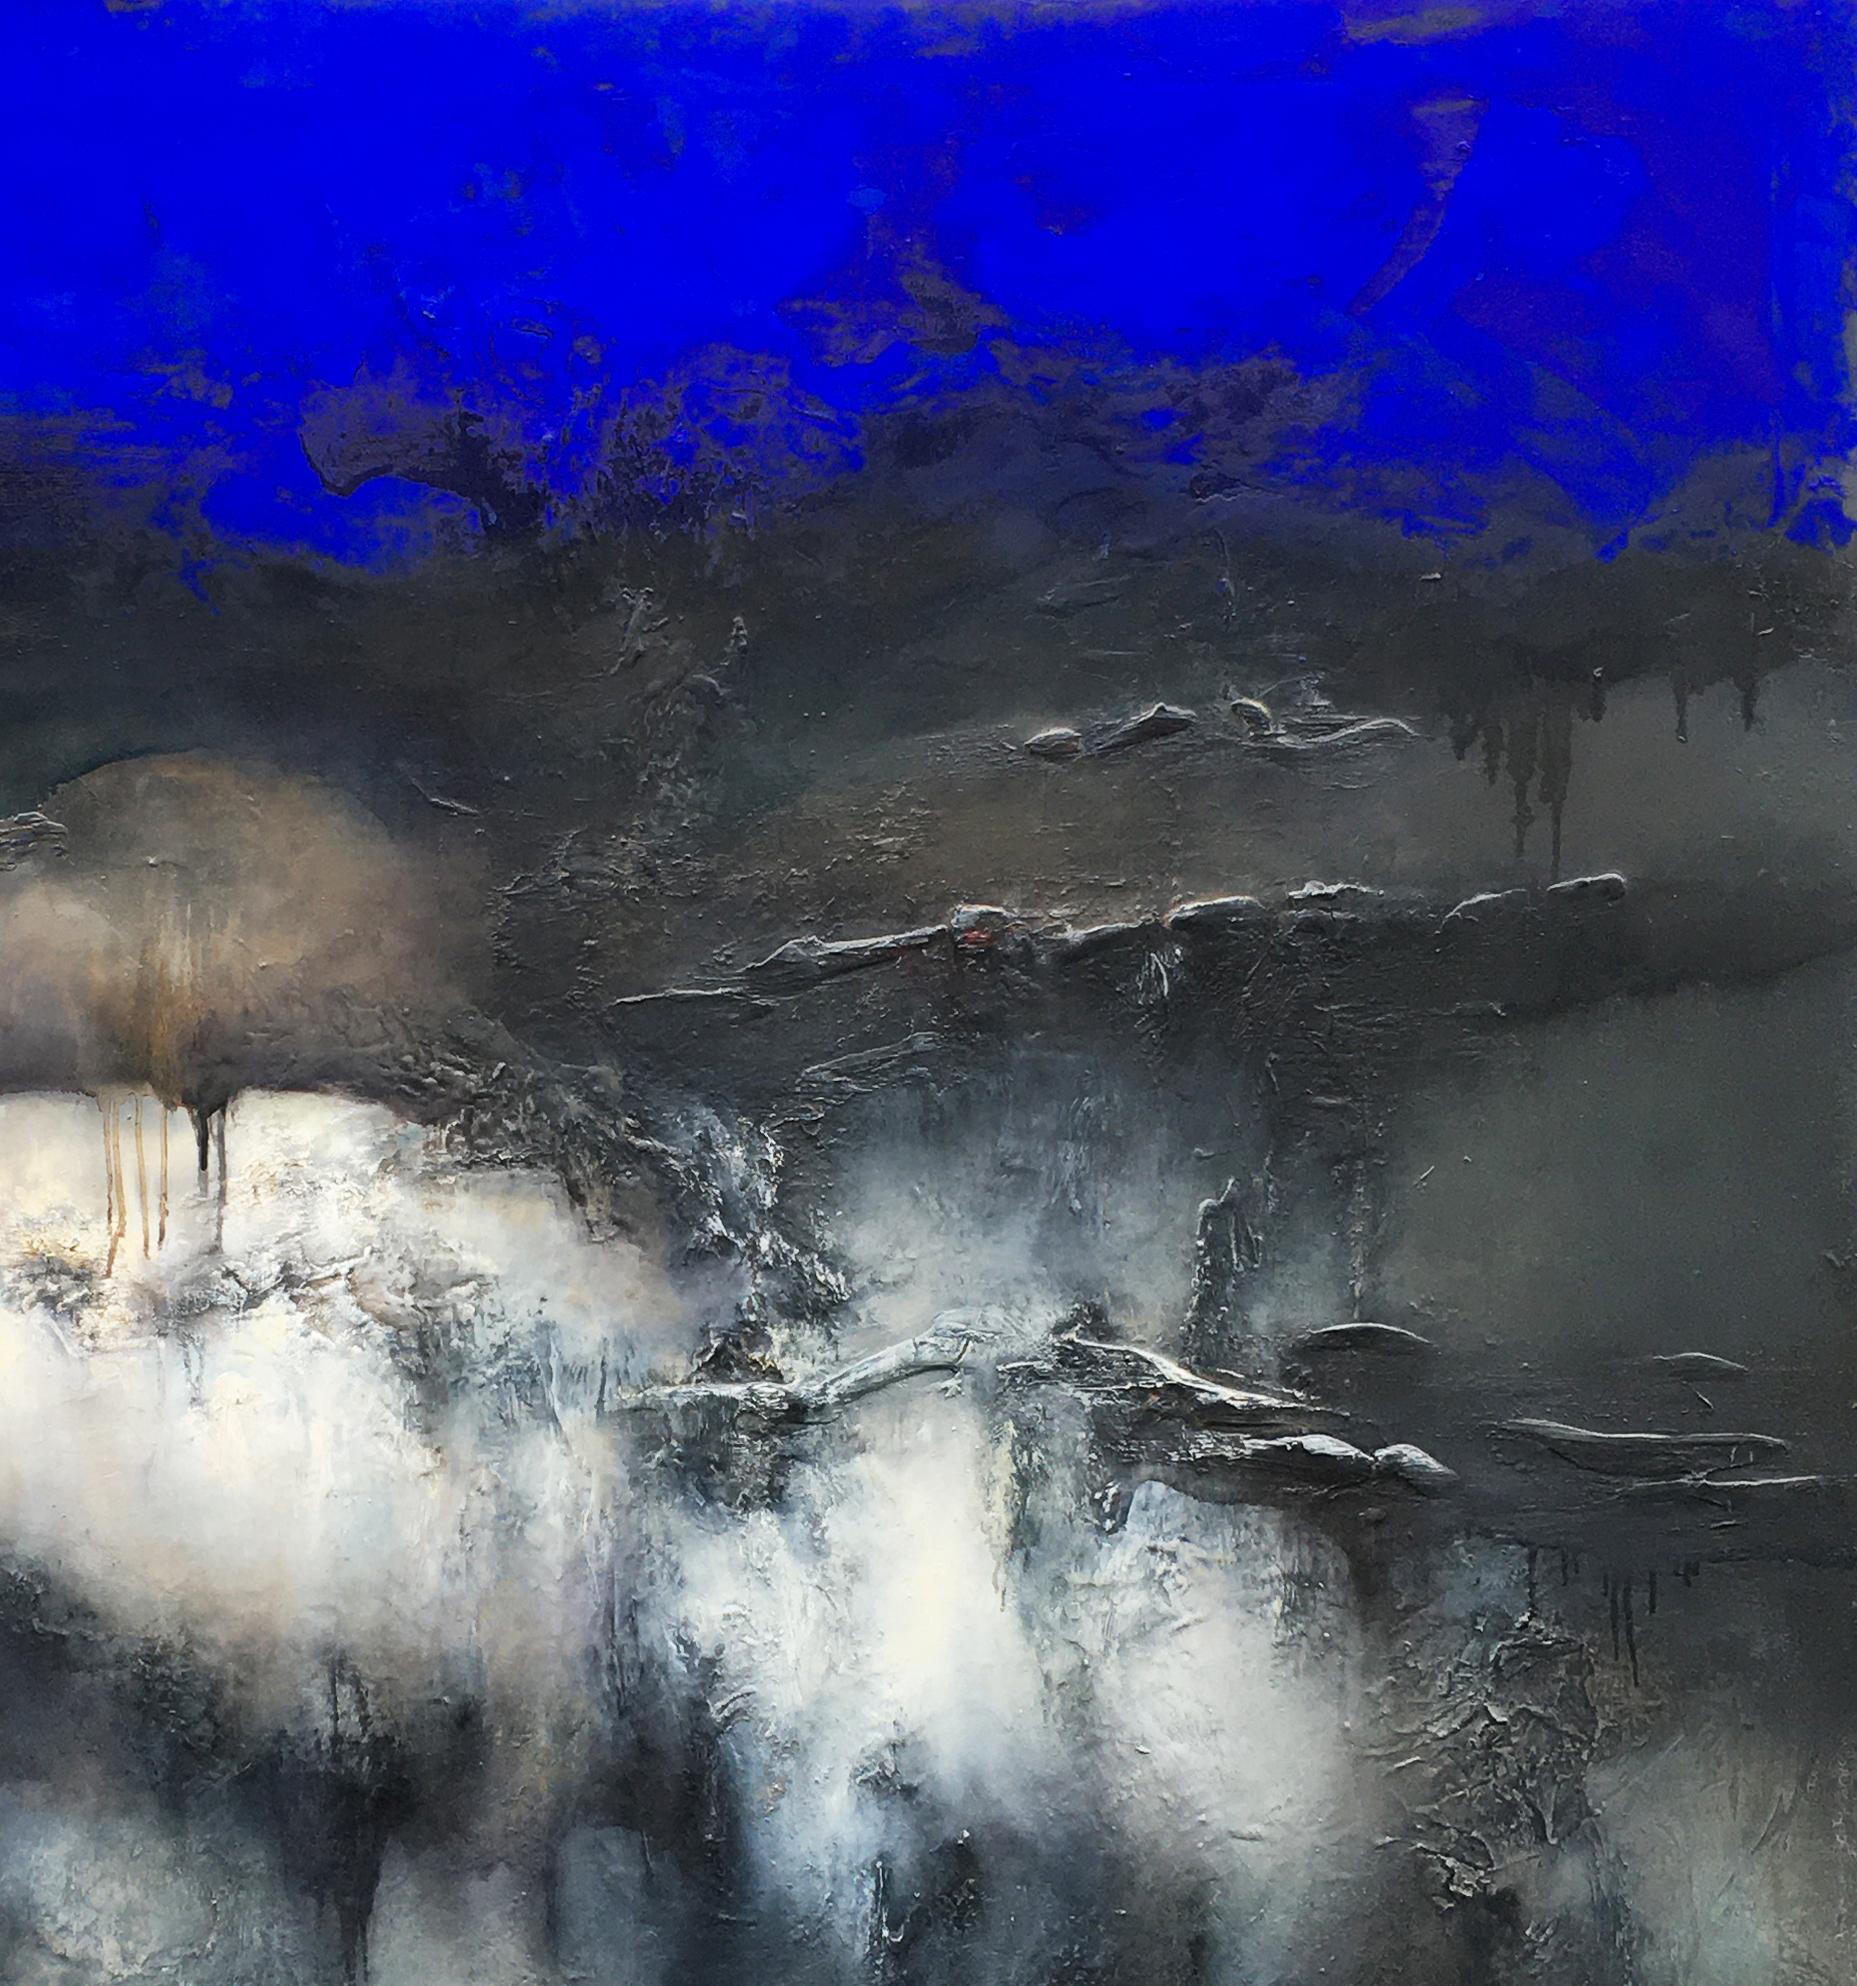 Nocturne Outremer is a Contemporary Abstract Oil Painting by Alexandre Valette who has a master degree in Art History and is a complete artist, influenced by the work of the great masters. He explores from a young age drawing through the human